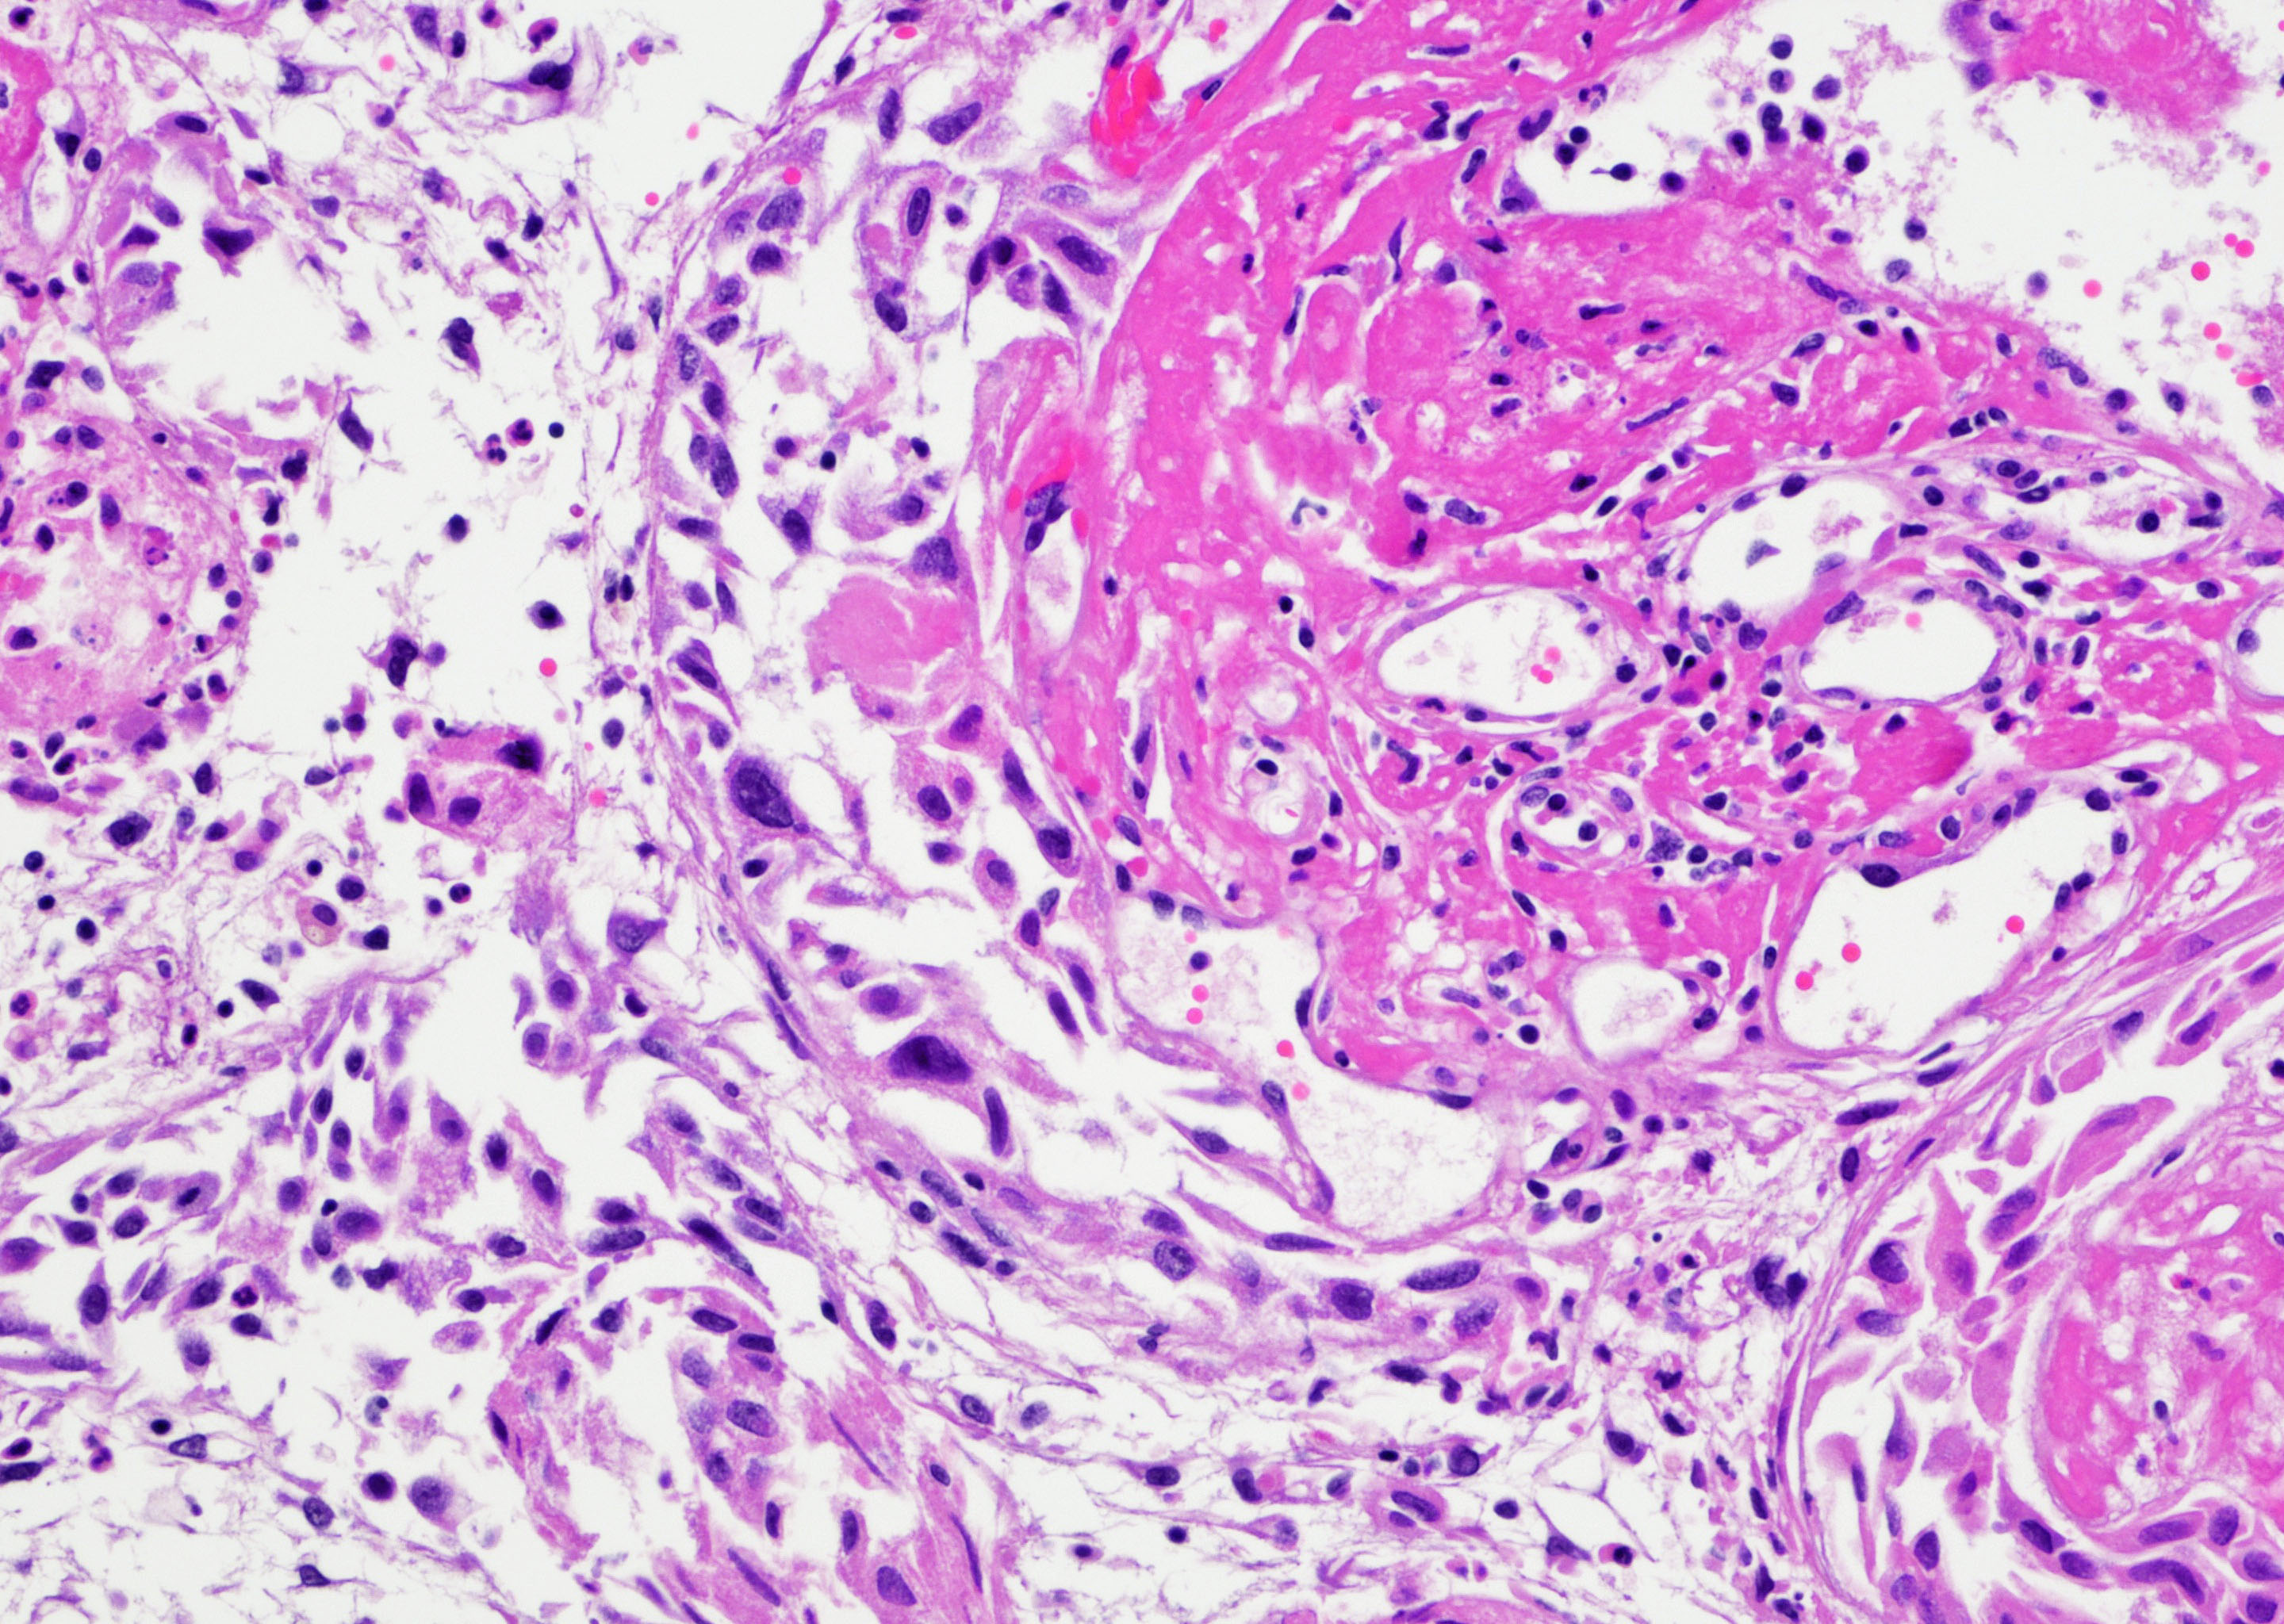 Atypical urothelial proliferation